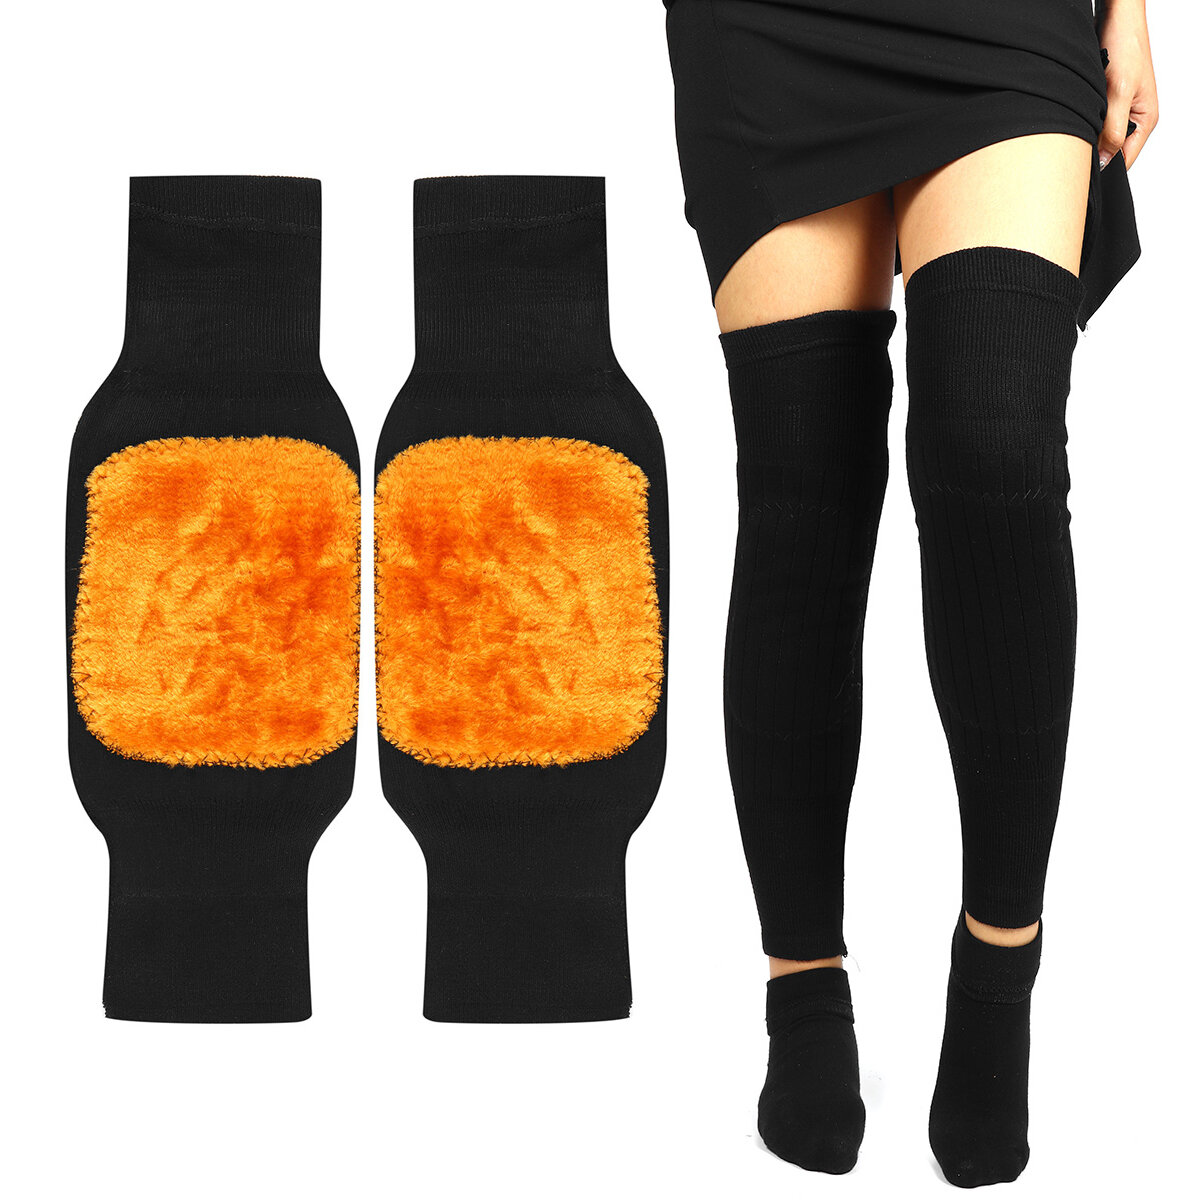 Cashmere Wool Thermal Knee Brace Winter Thermal Knee Pad Leg Warm Sports Legging Compression Sleeve Support Pad